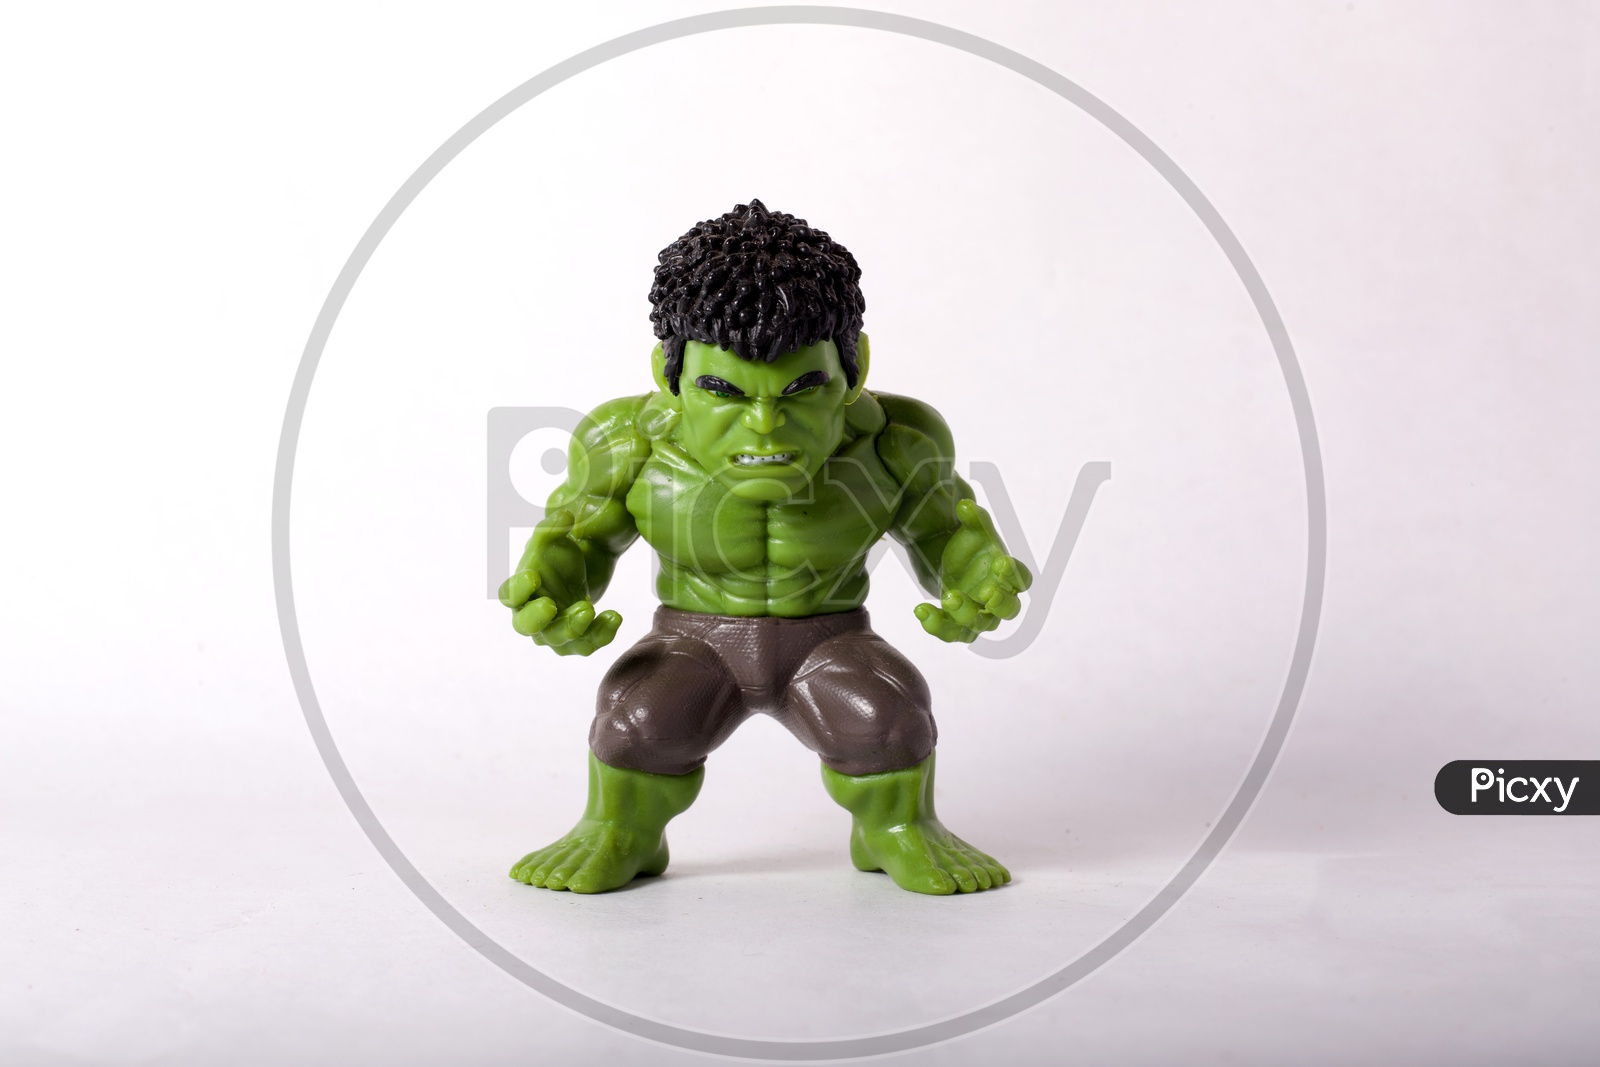 The Incredible Hulk toy.